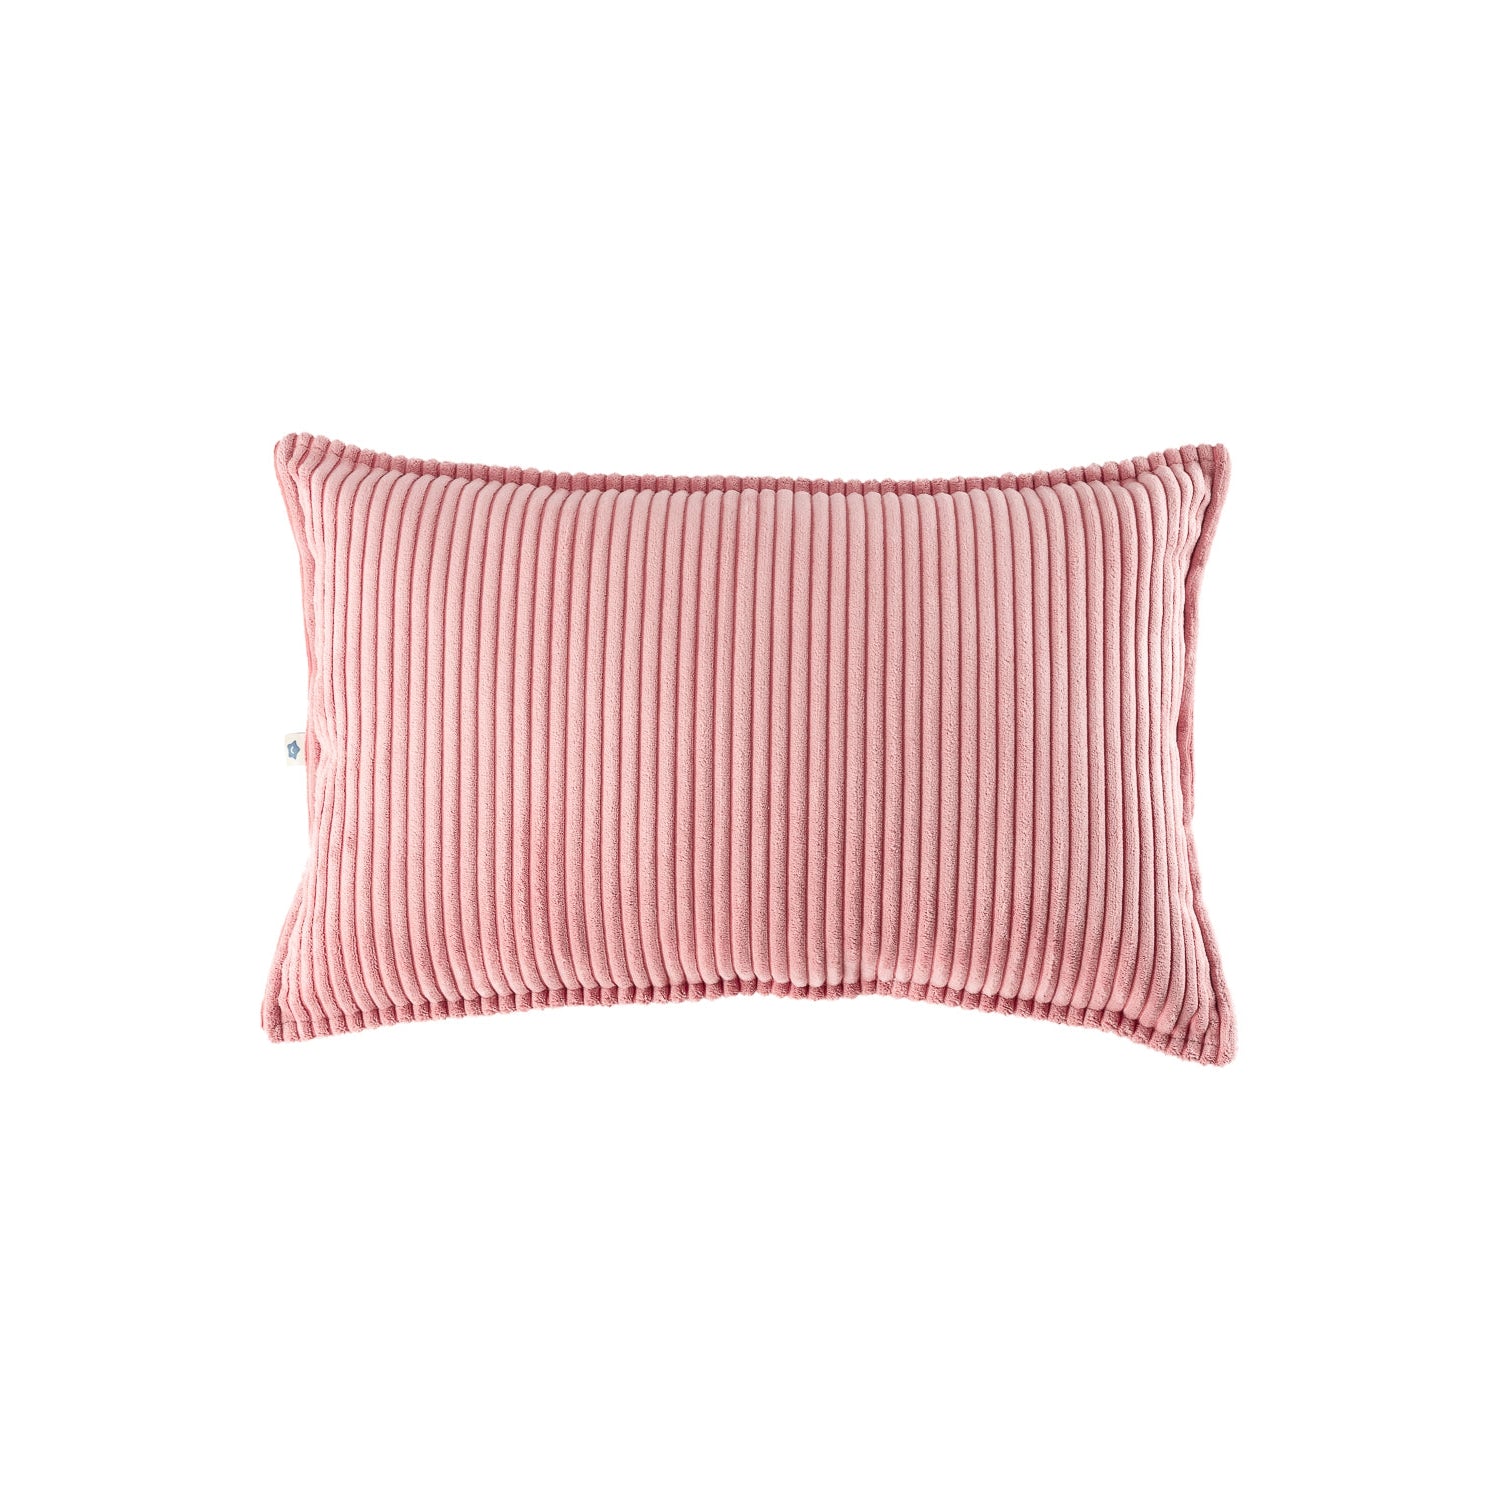 Wigiwama Pink Mousse Bolster at Rugs by Roo